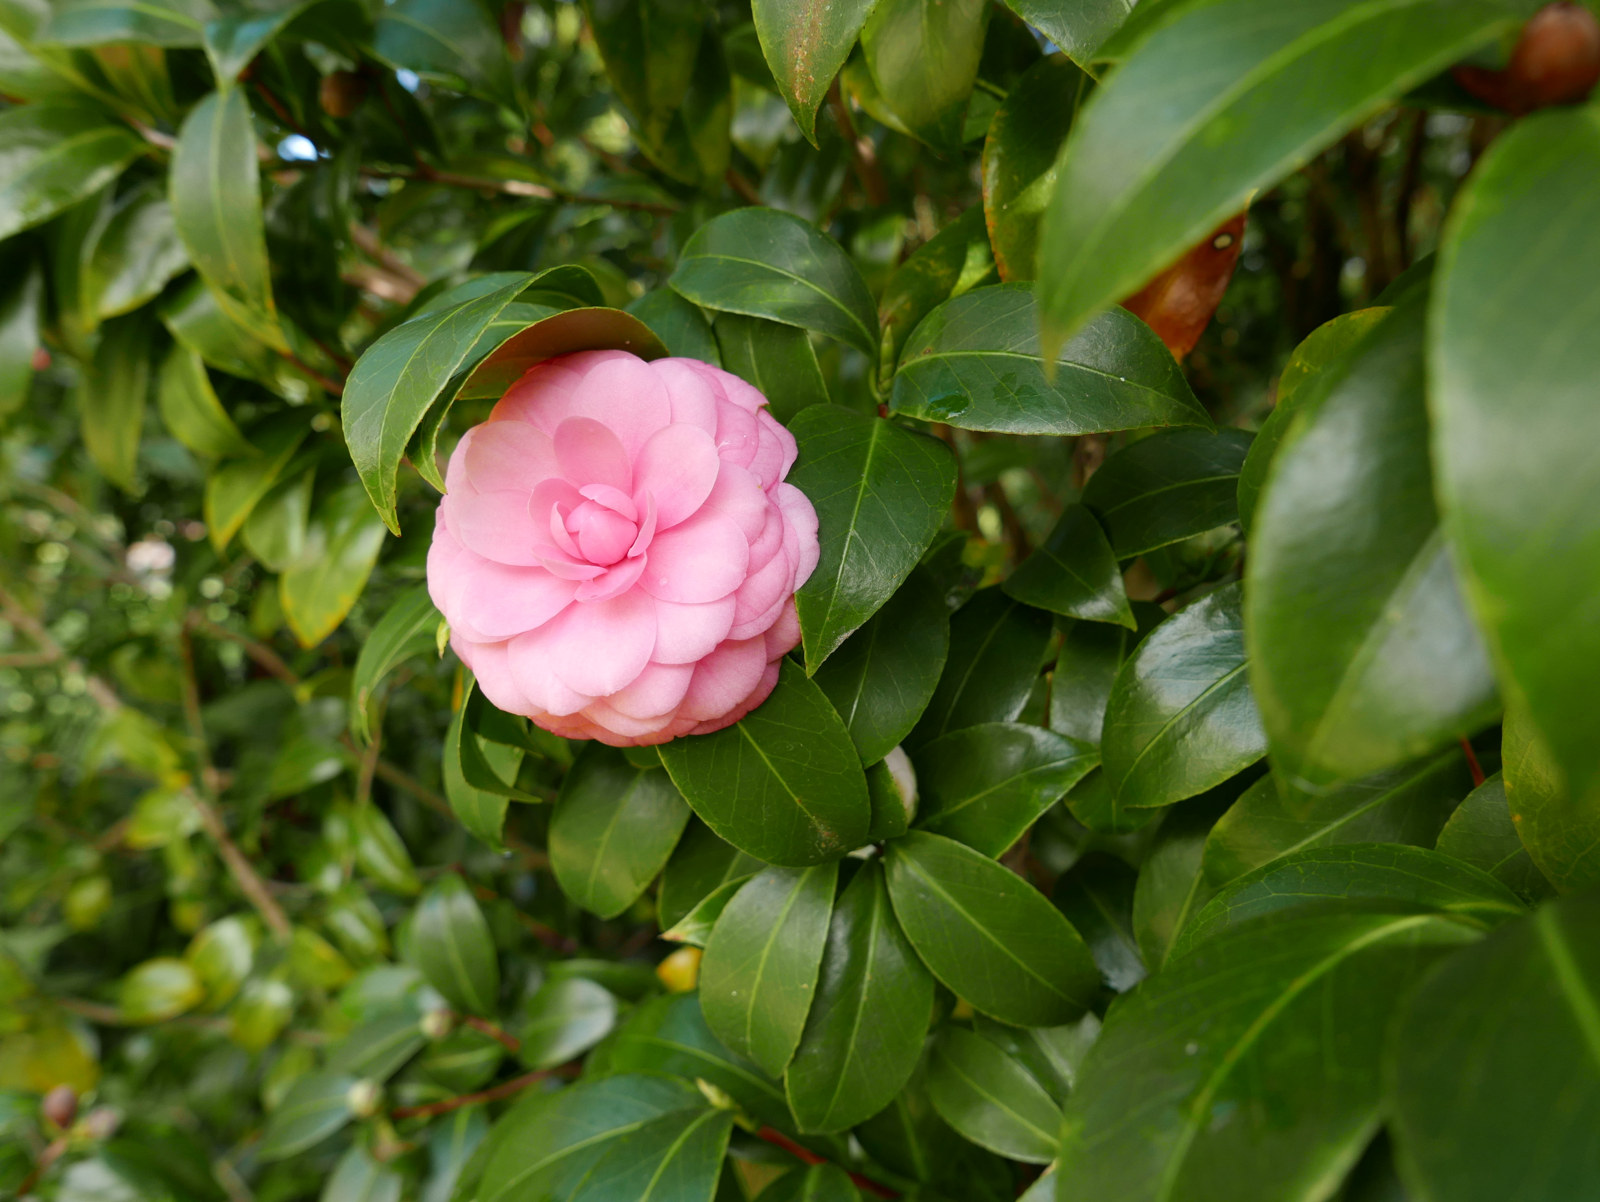 Pale pink bloom of the camellia Virginia Franco variety